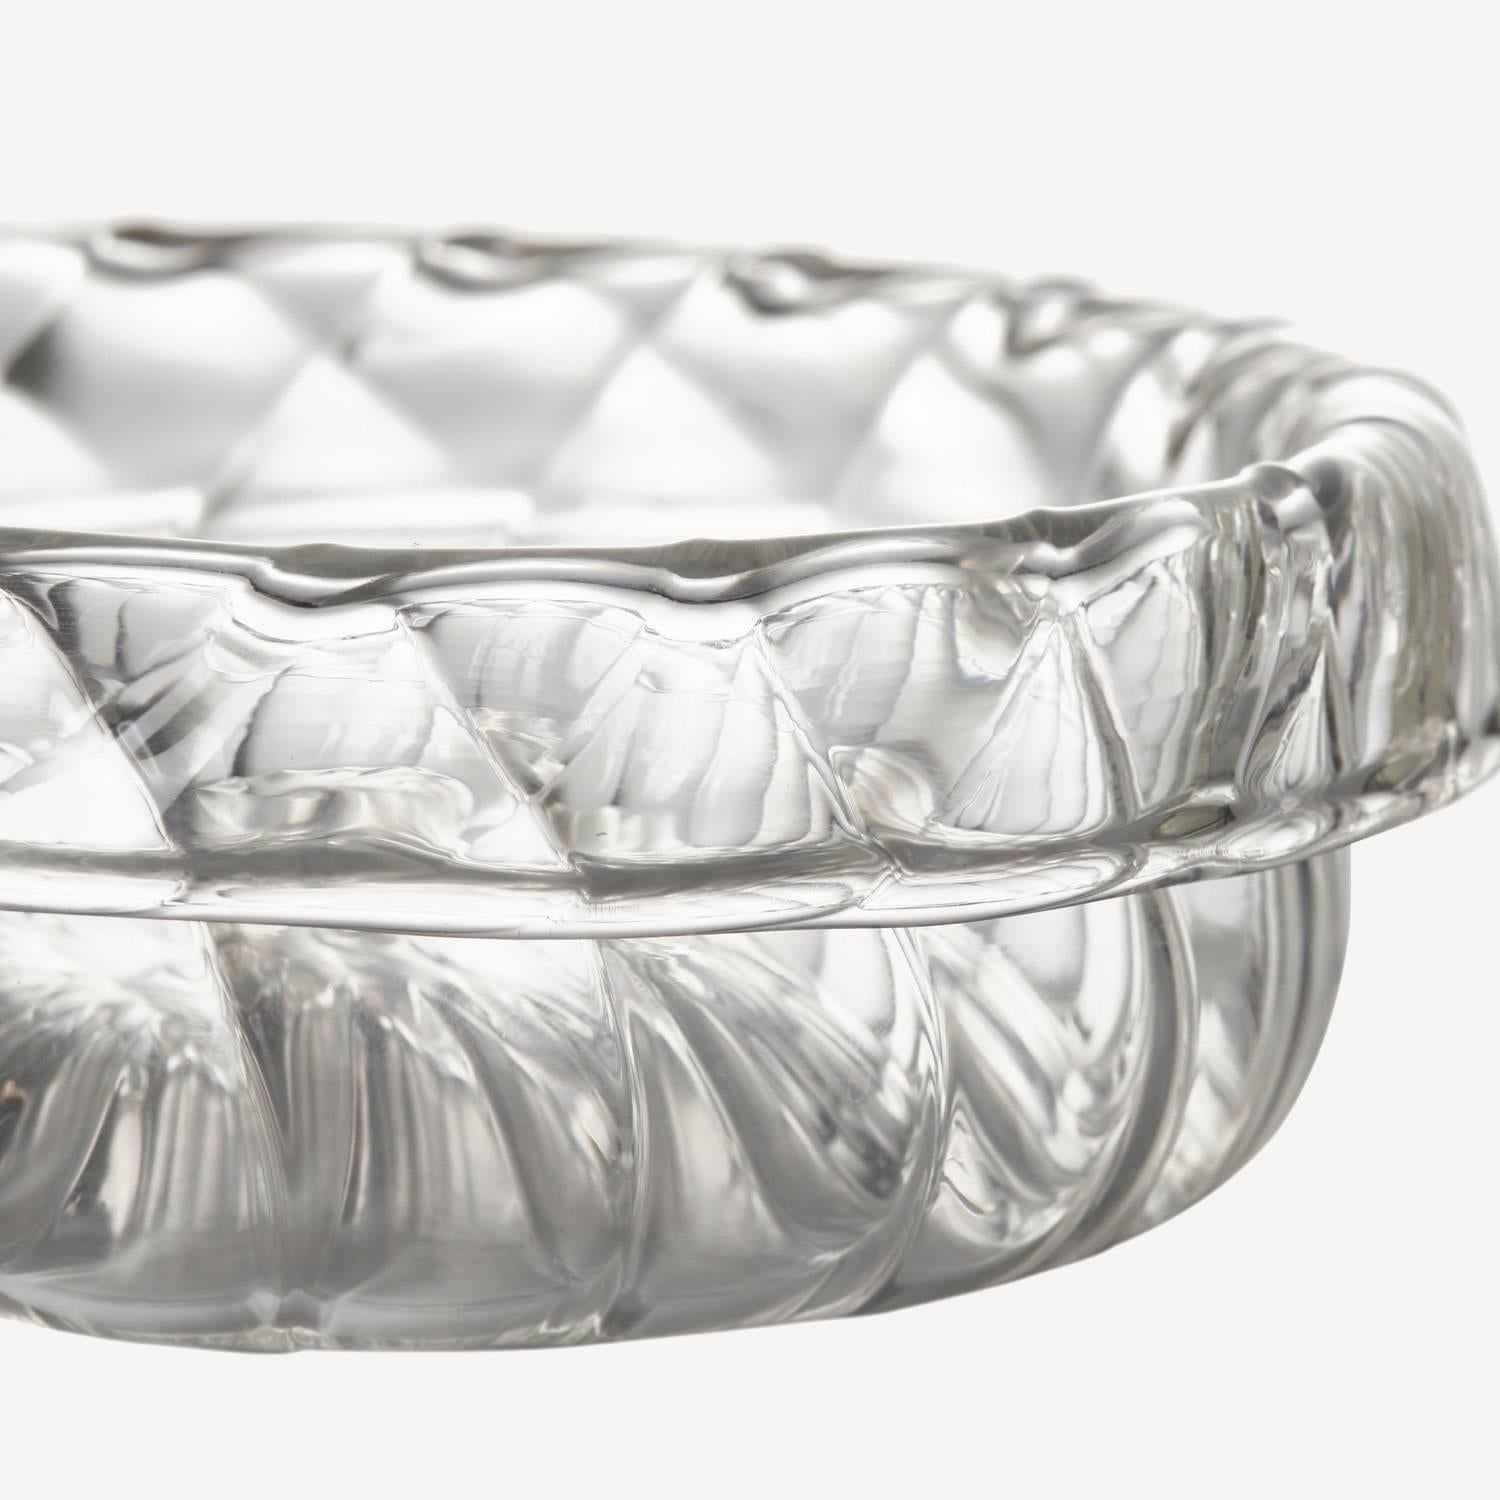 Inspired by the movement of water, this free blown Borosilicate (heat resistant and durable) glass dish has been made with a unique ribbed surface and an organic shape. Jochen made the dish exclusively with The New Craftsmen as part of the bathing